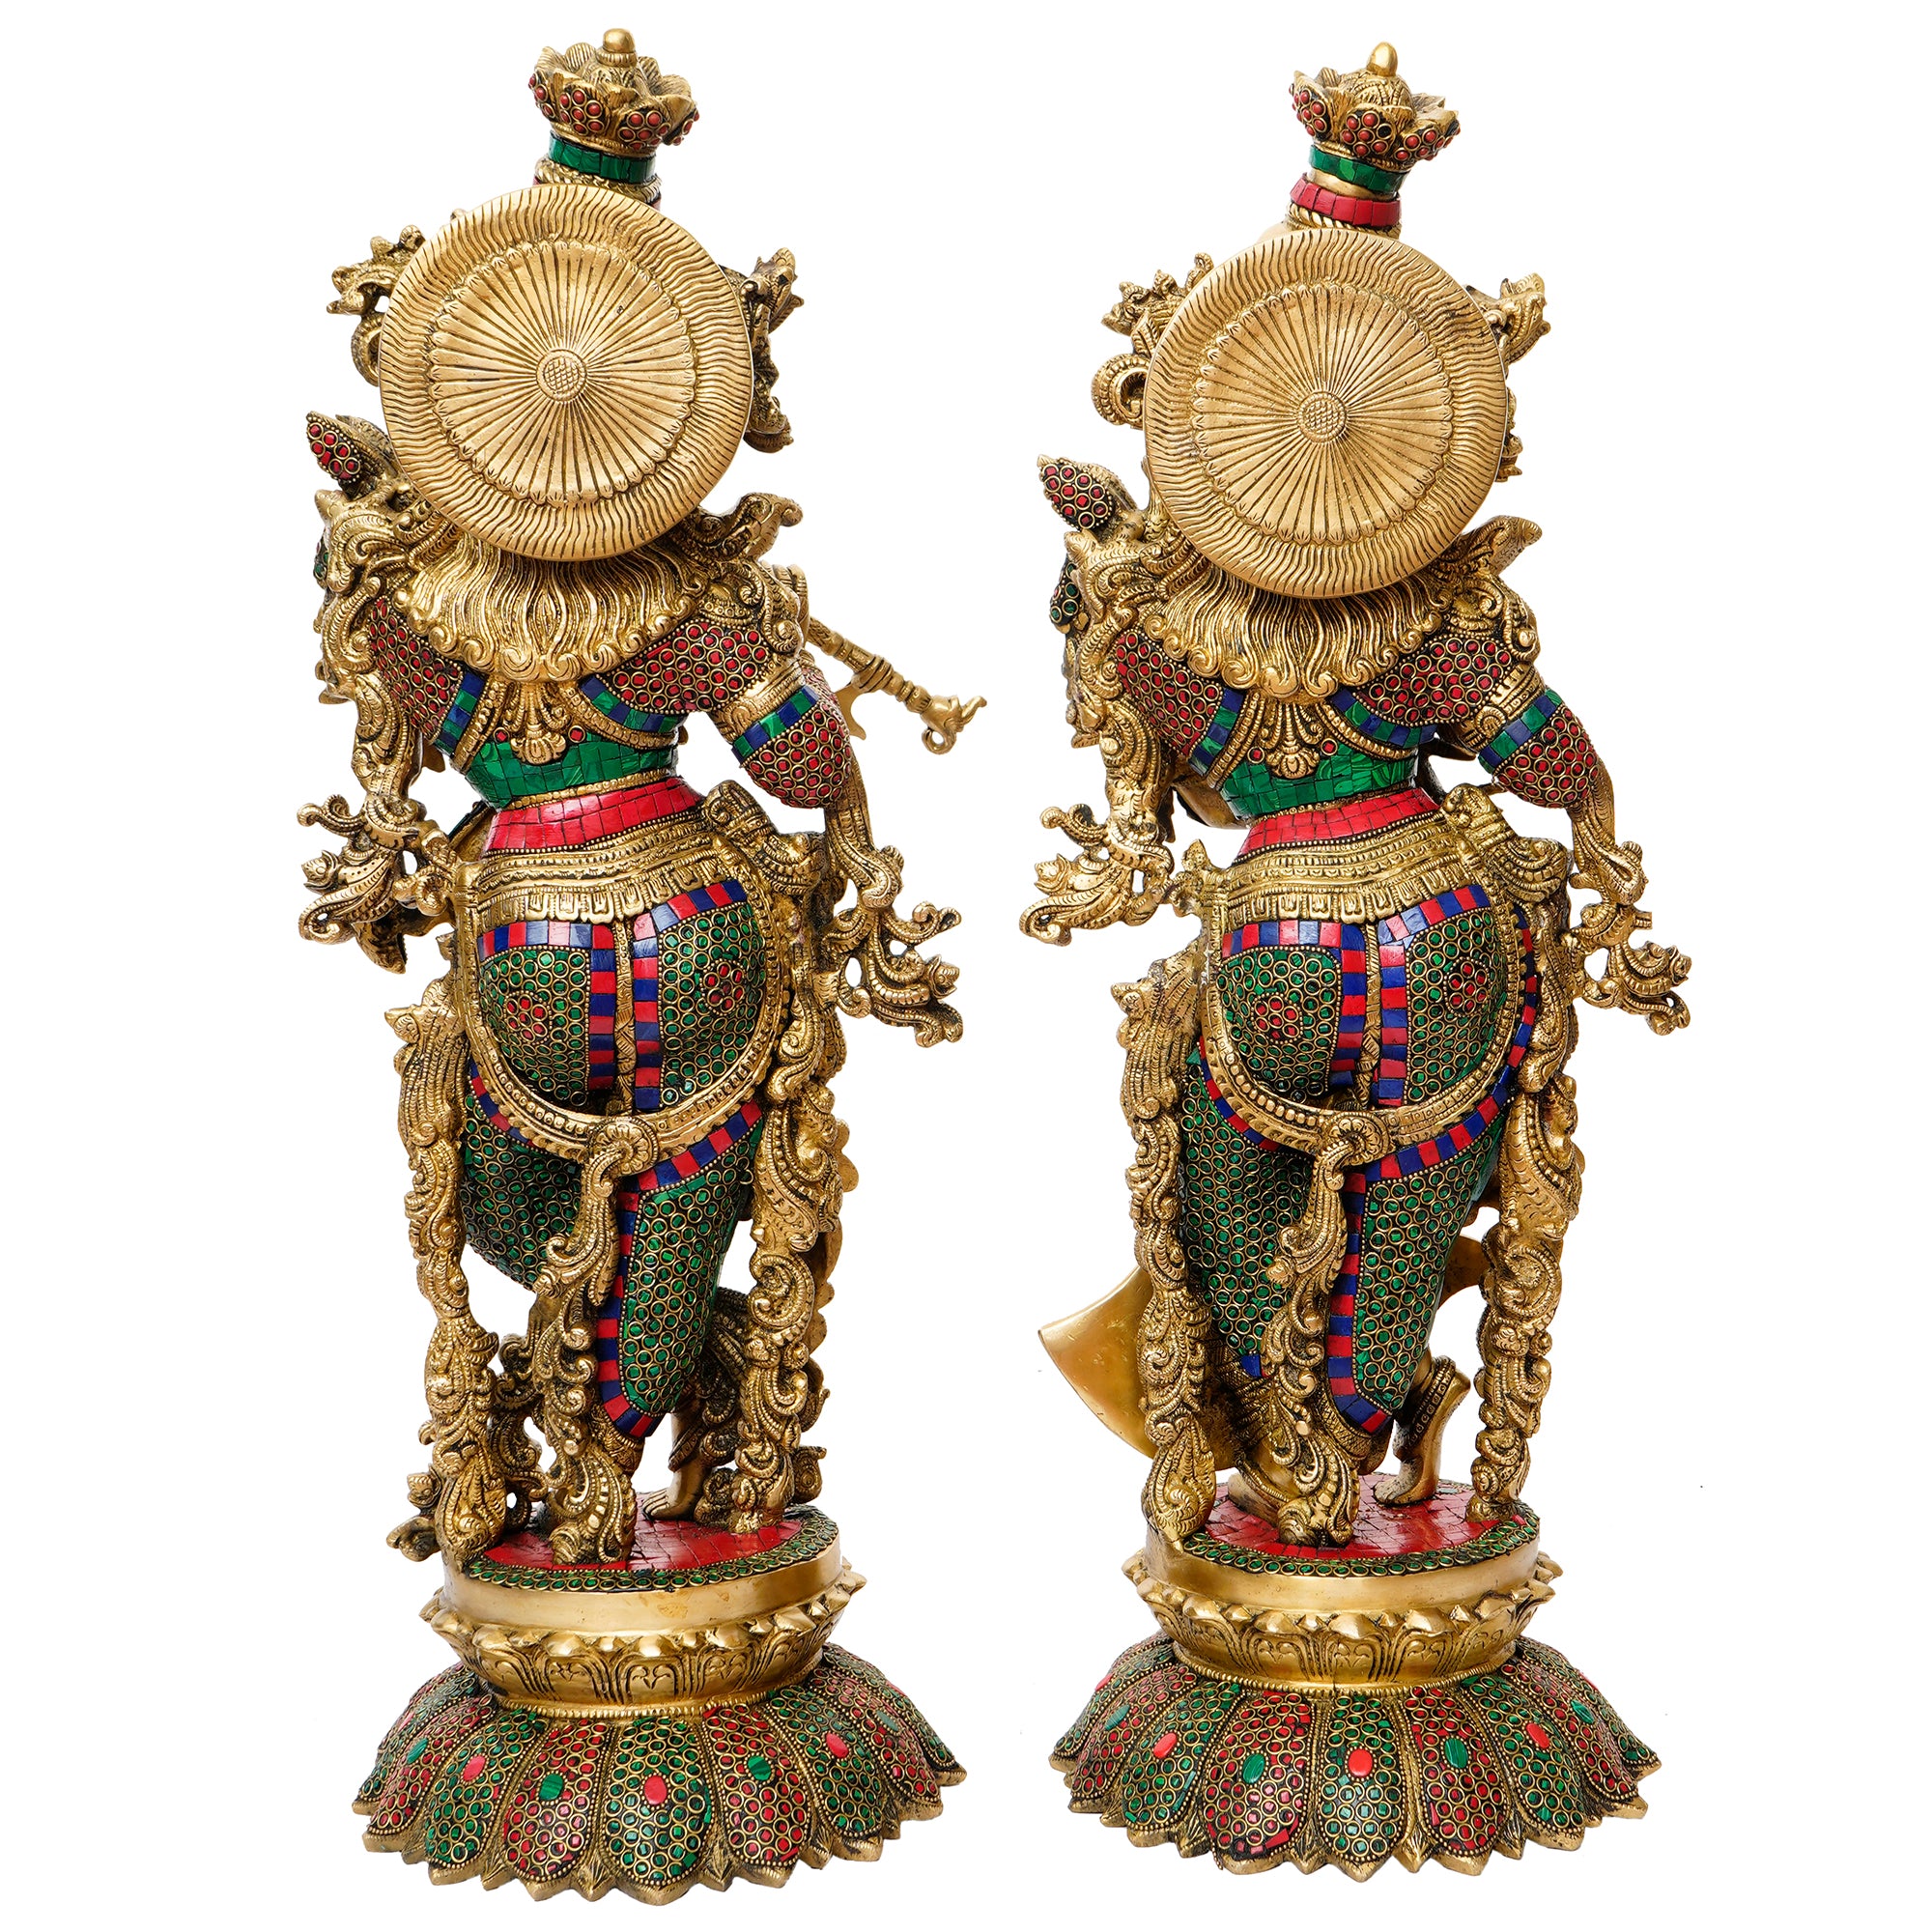 Golden Radha Krishna Playing Flute Handcrafted Brass Idol with Colorful Stone Work 6